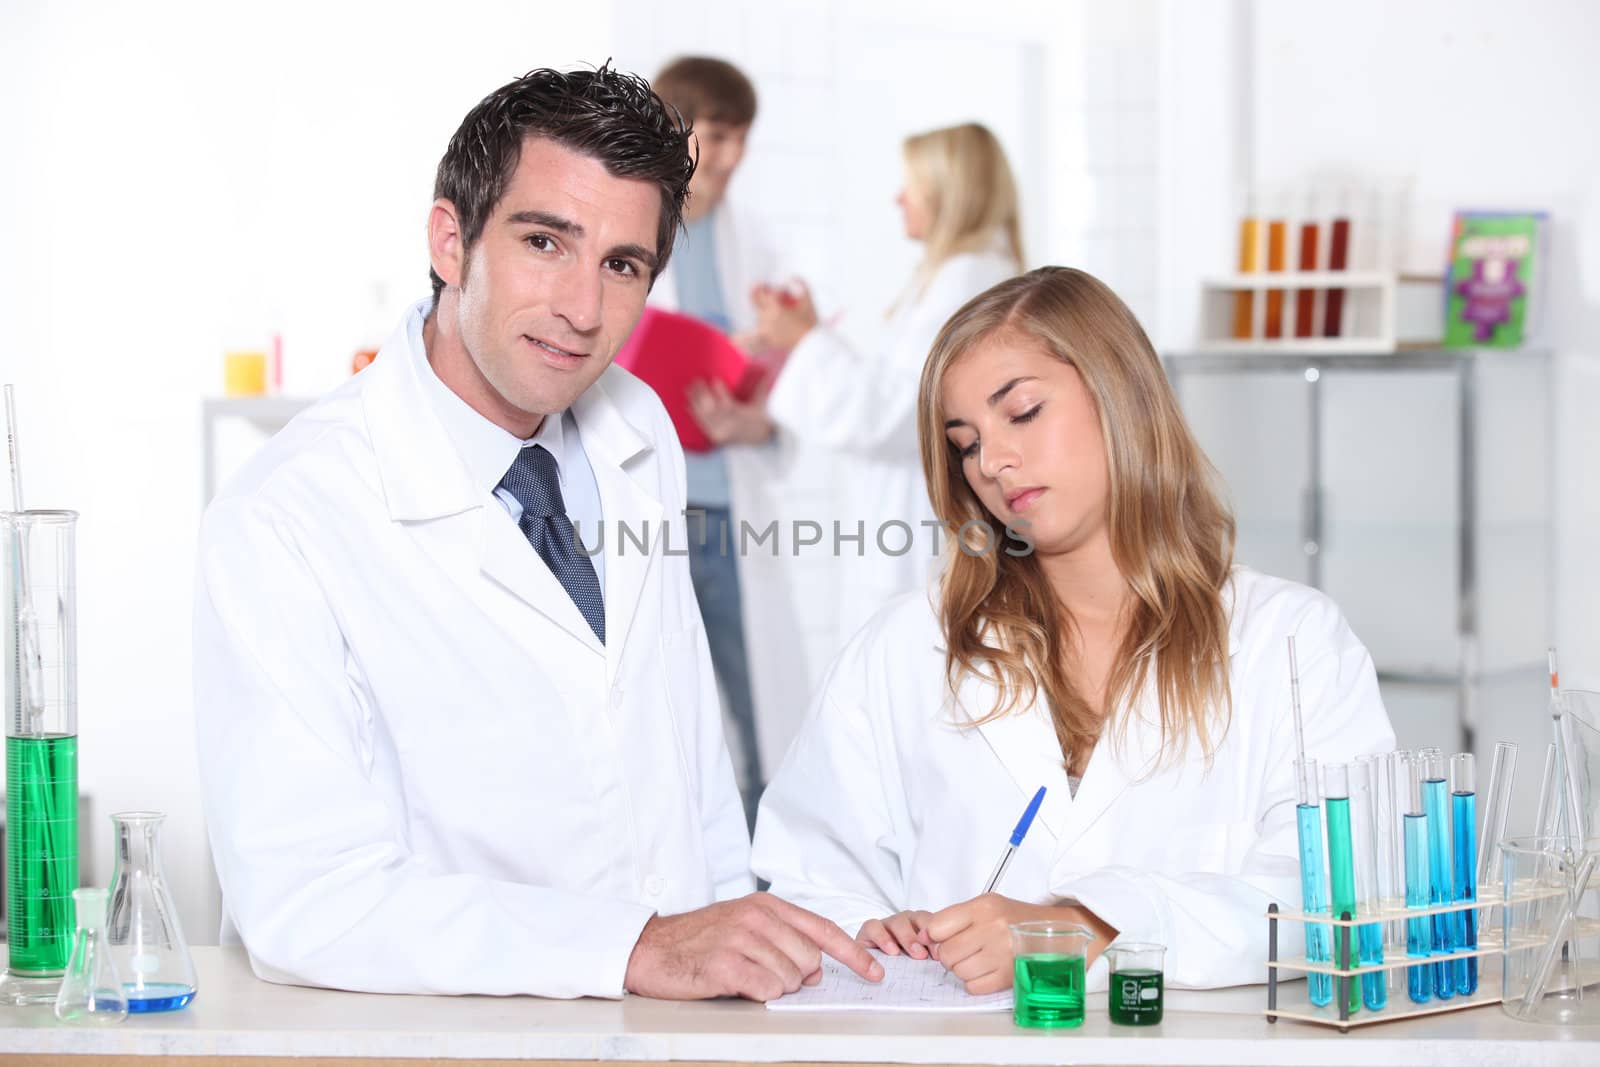 Student and teacher in chemistry class by phovoir